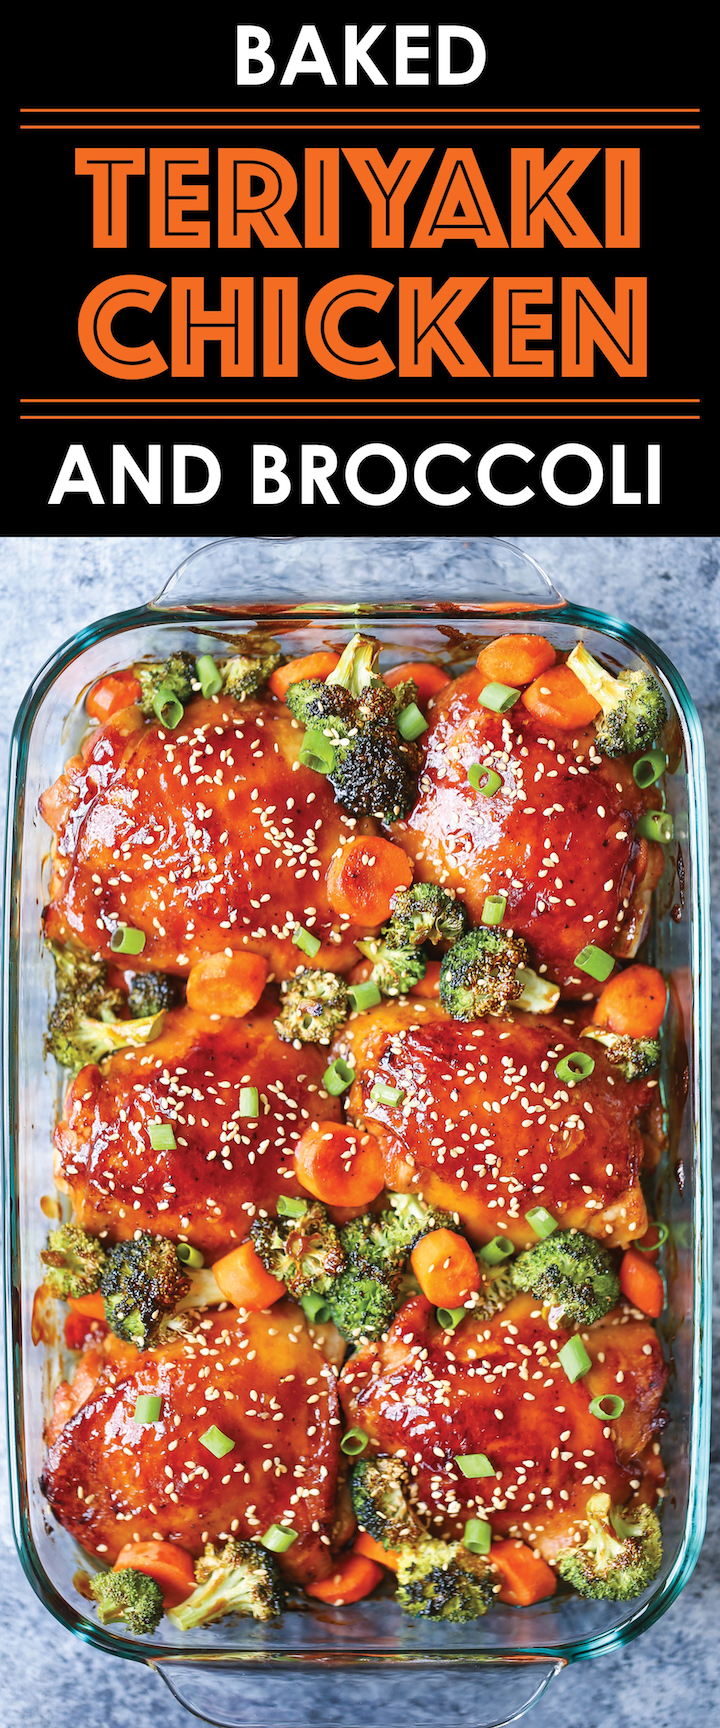 Baked Teriyaki Chicken and Broccoli - A takeout classic baked right at home with homemade teriyaki sauce - perfect over rice! Can be made ahead of time too!